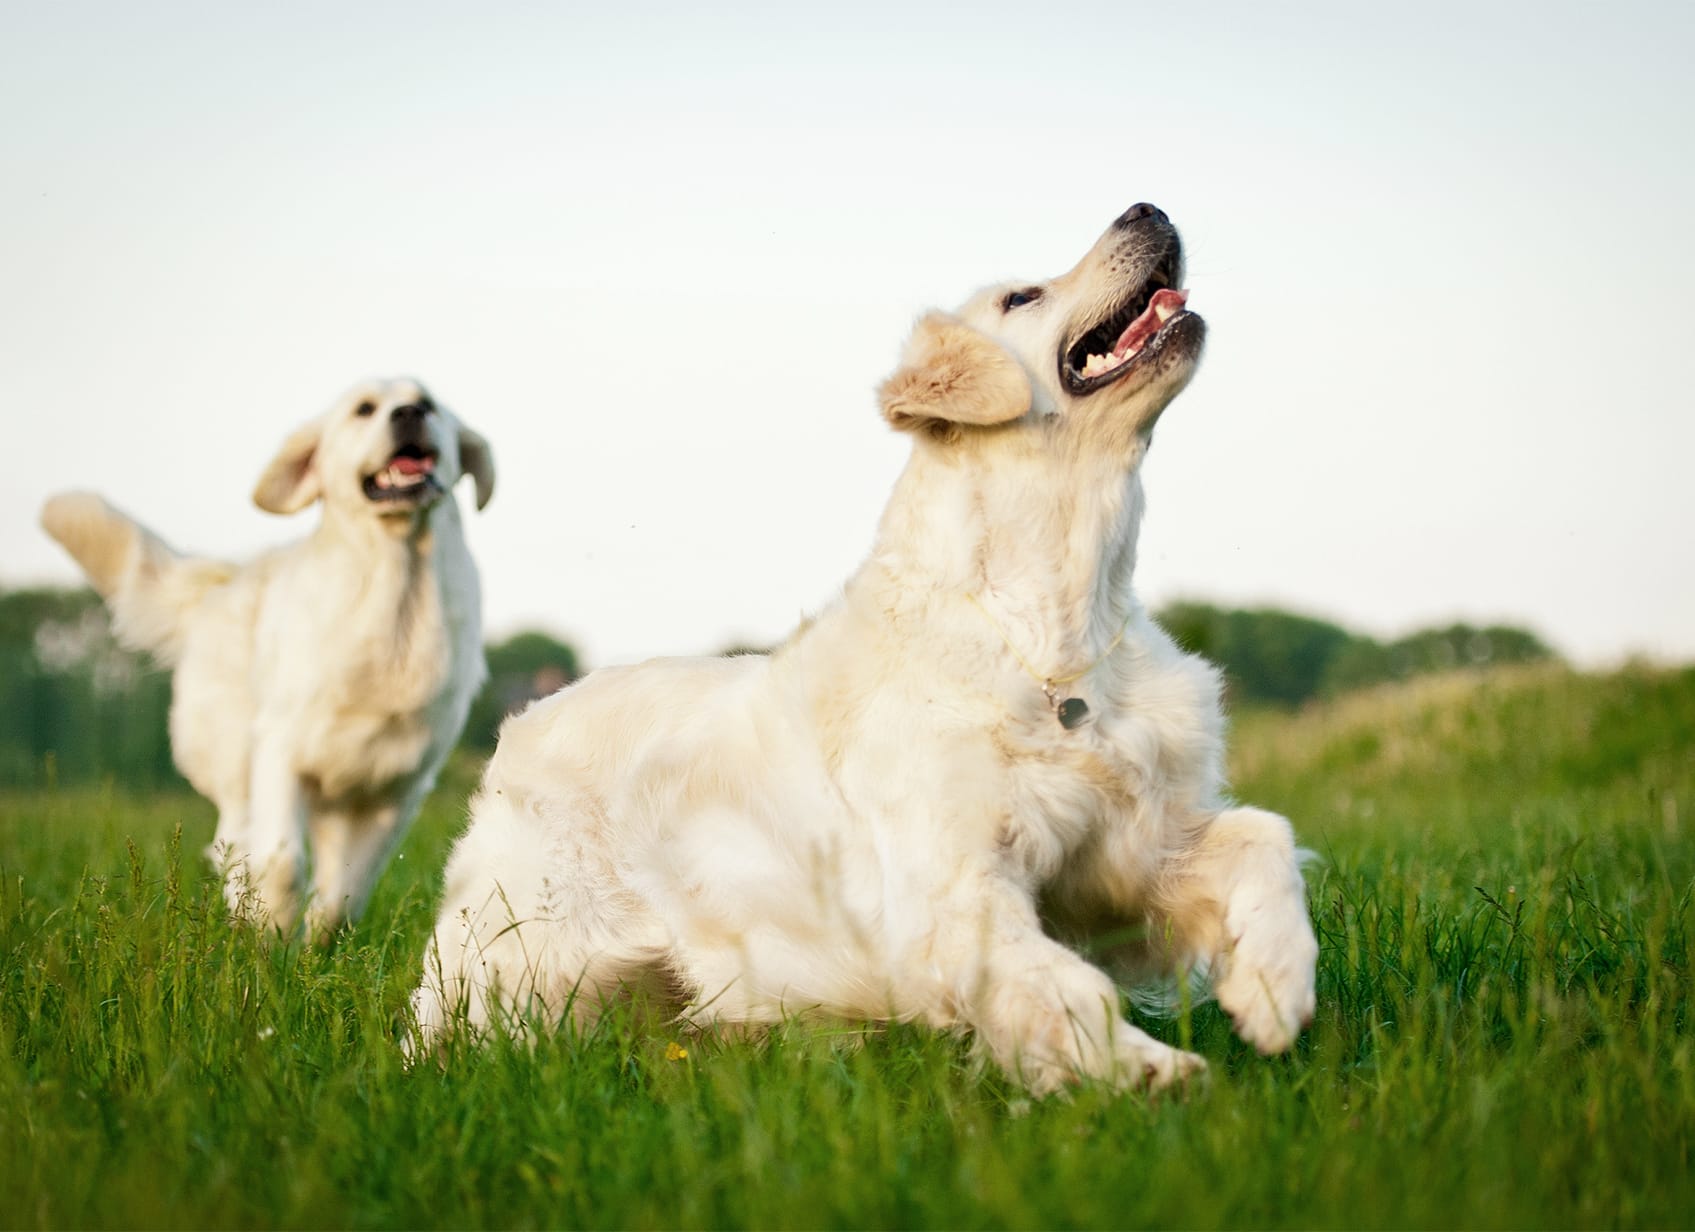 Two dogs running through a green field with a clear sky.